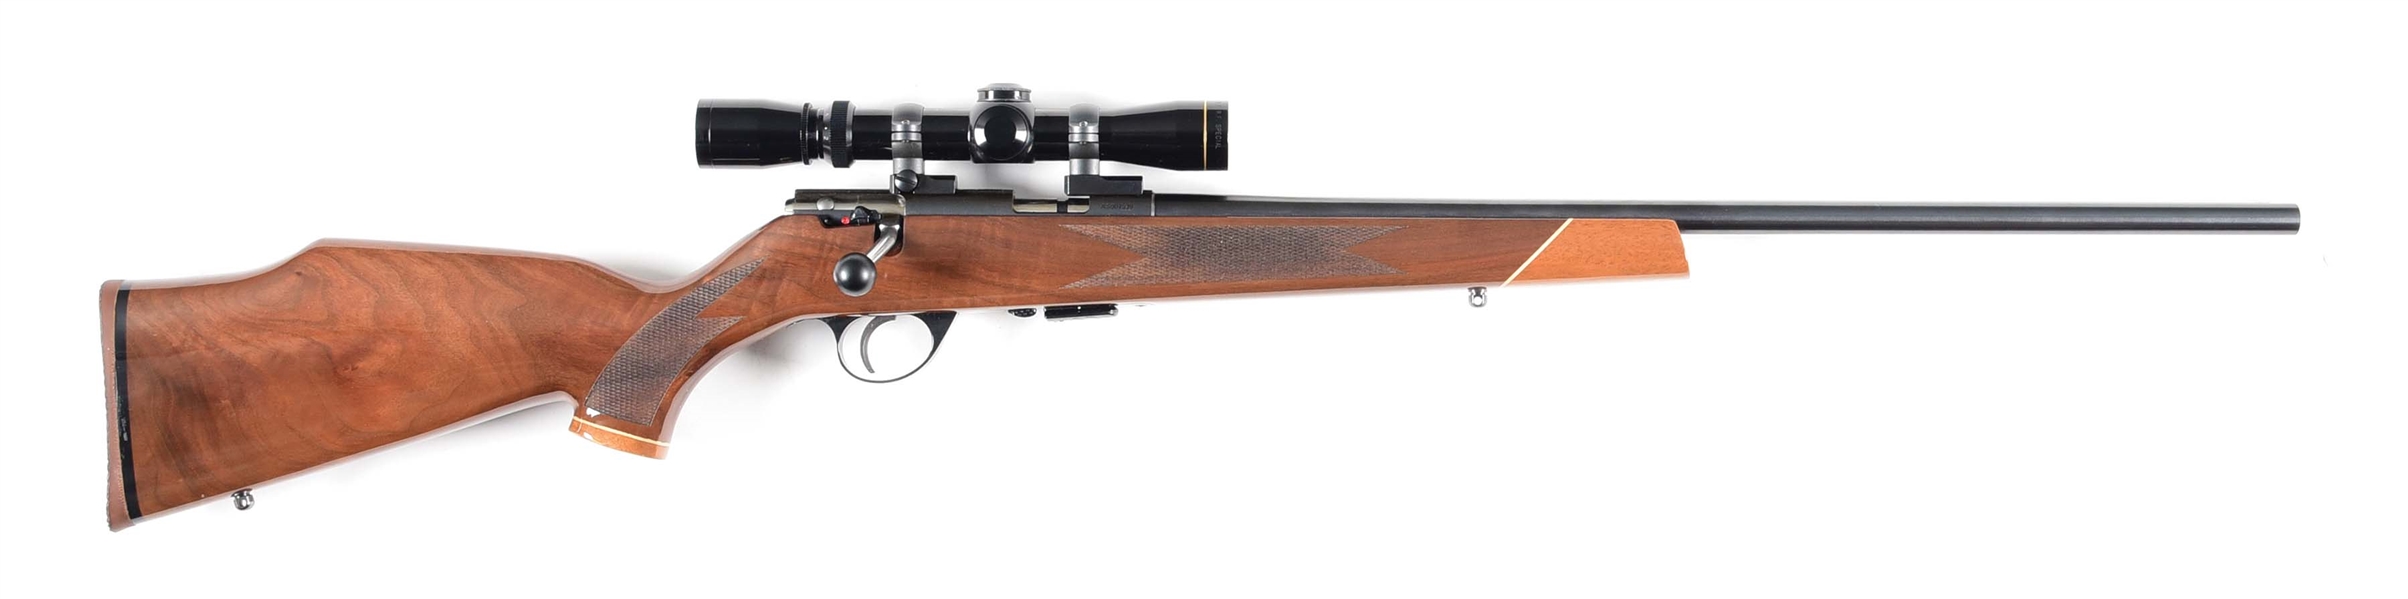 (M) WEATHERBY MARK XXII  BOLT ACTION RIFLE WITH SCOPE.